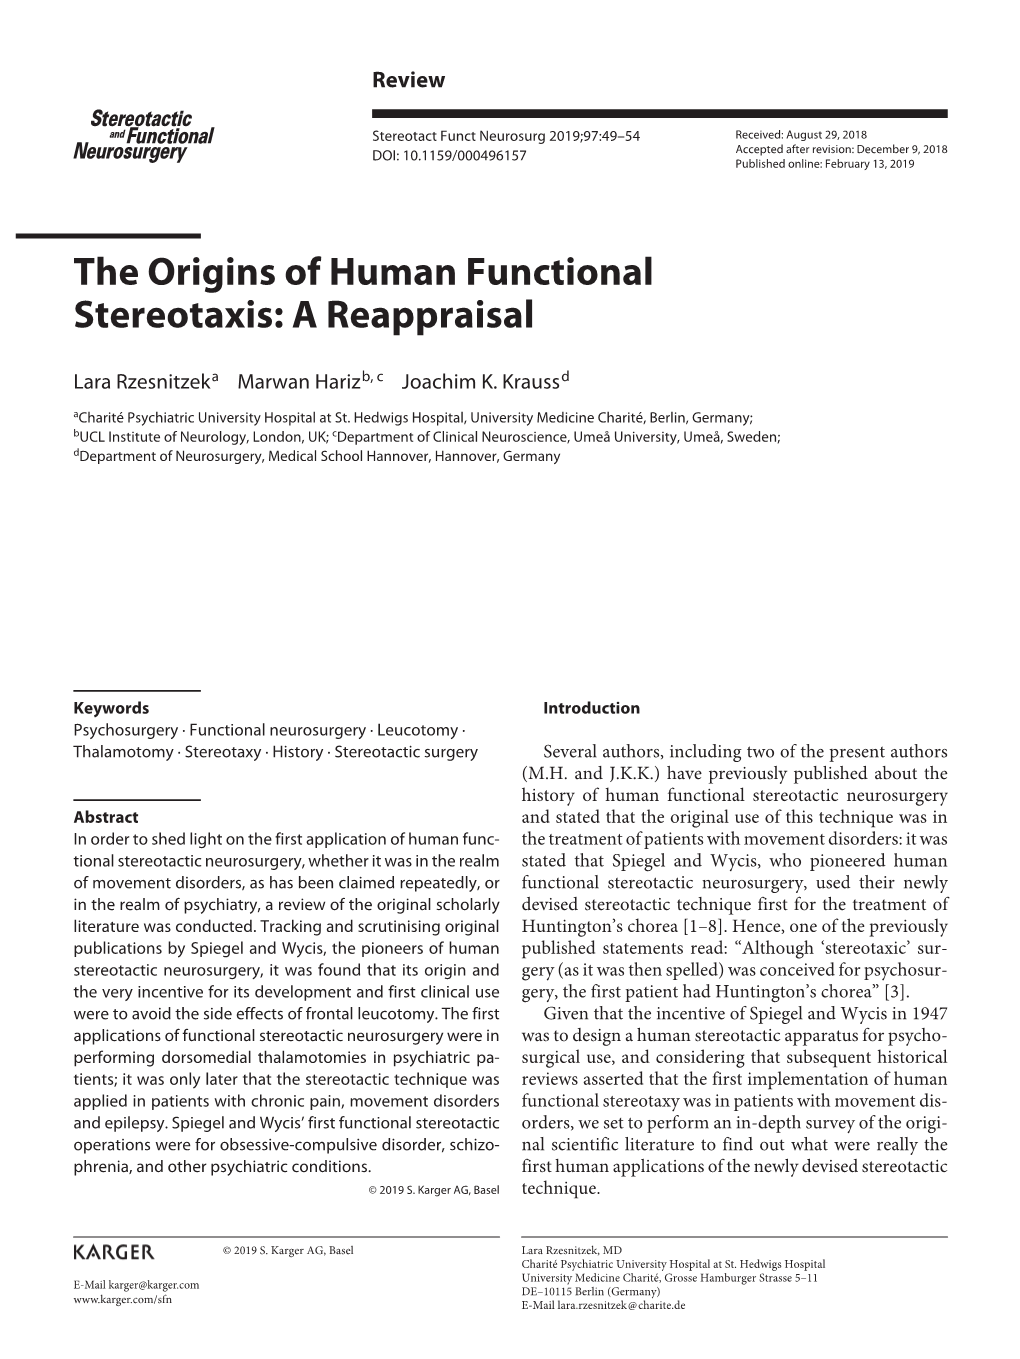 The Origins of Human Functional Stereotaxis: a Reappraisal